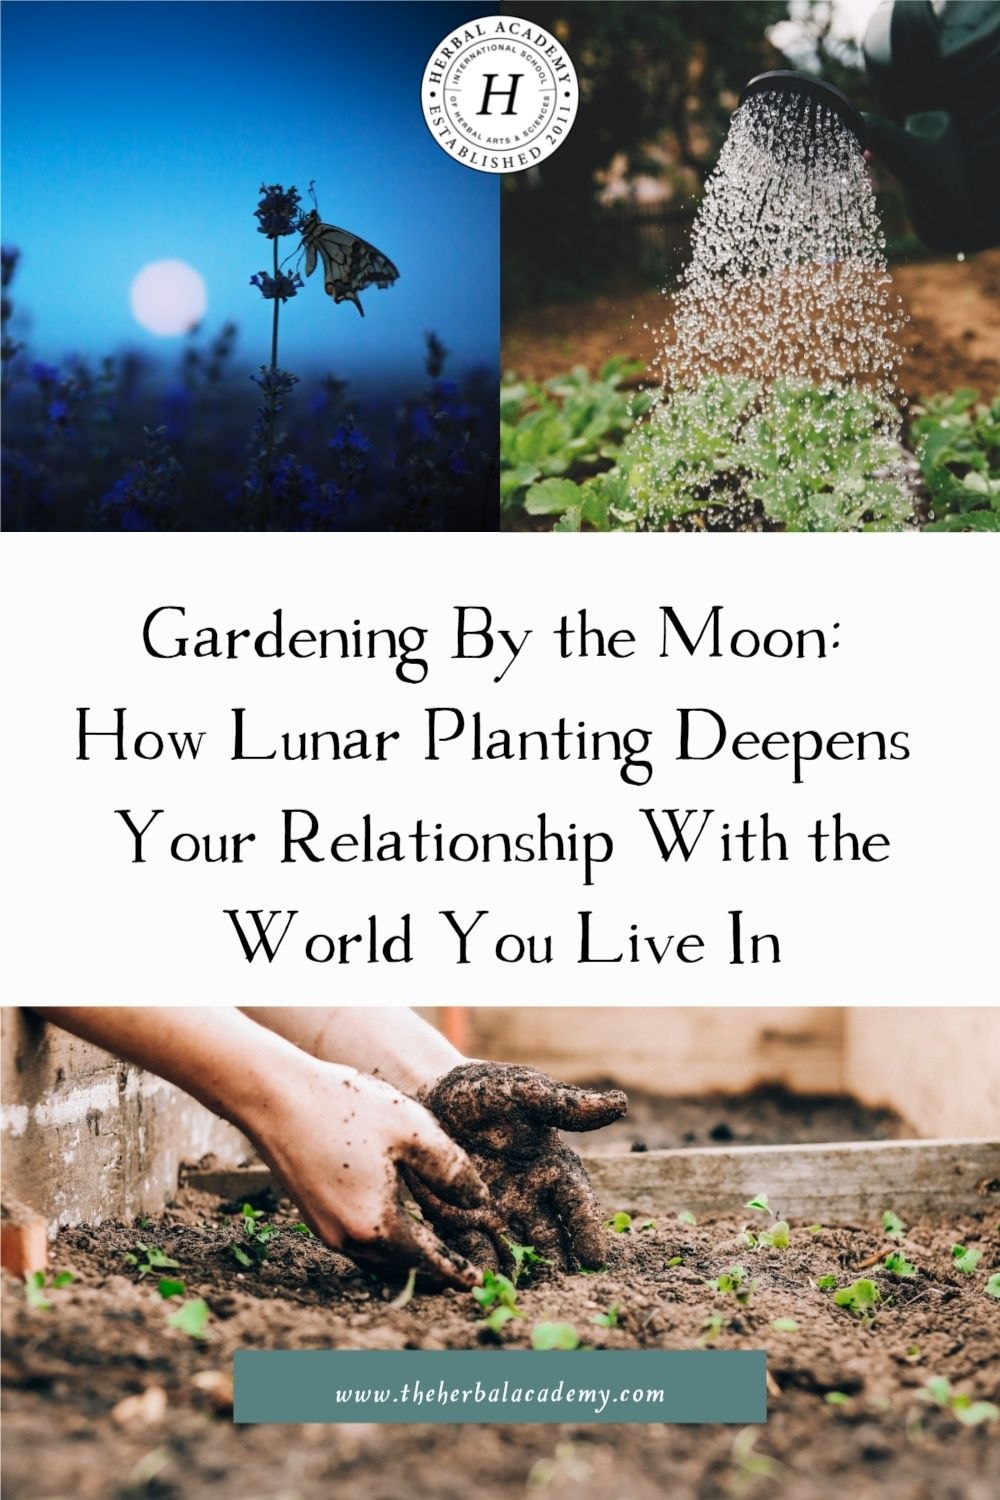 Gardening By the Moon: How Lunar Planting Deepens Your Relationship With the World You Live In | Herbal Academy | Gardening by the moon provides agriculturists with a way of managing work, while helping them to be more connected to the rhythms of nature.